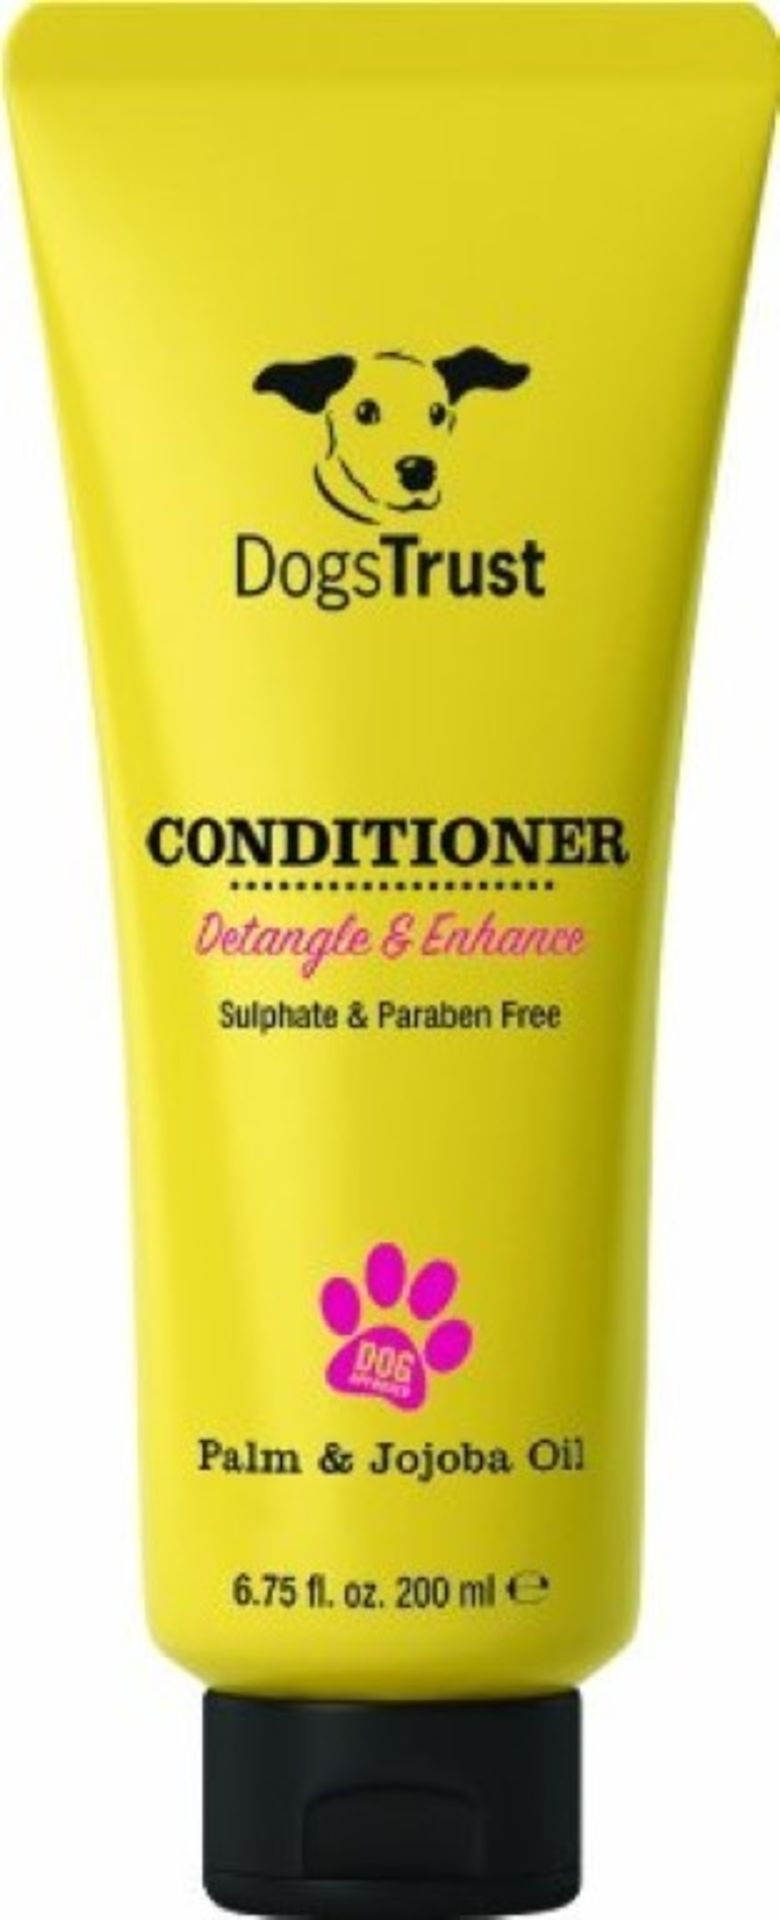 60 x Various Dogs Trust Shampoos and Conditioners - Brand New Stock - CL028 - Includes No Tears, - Image 7 of 15